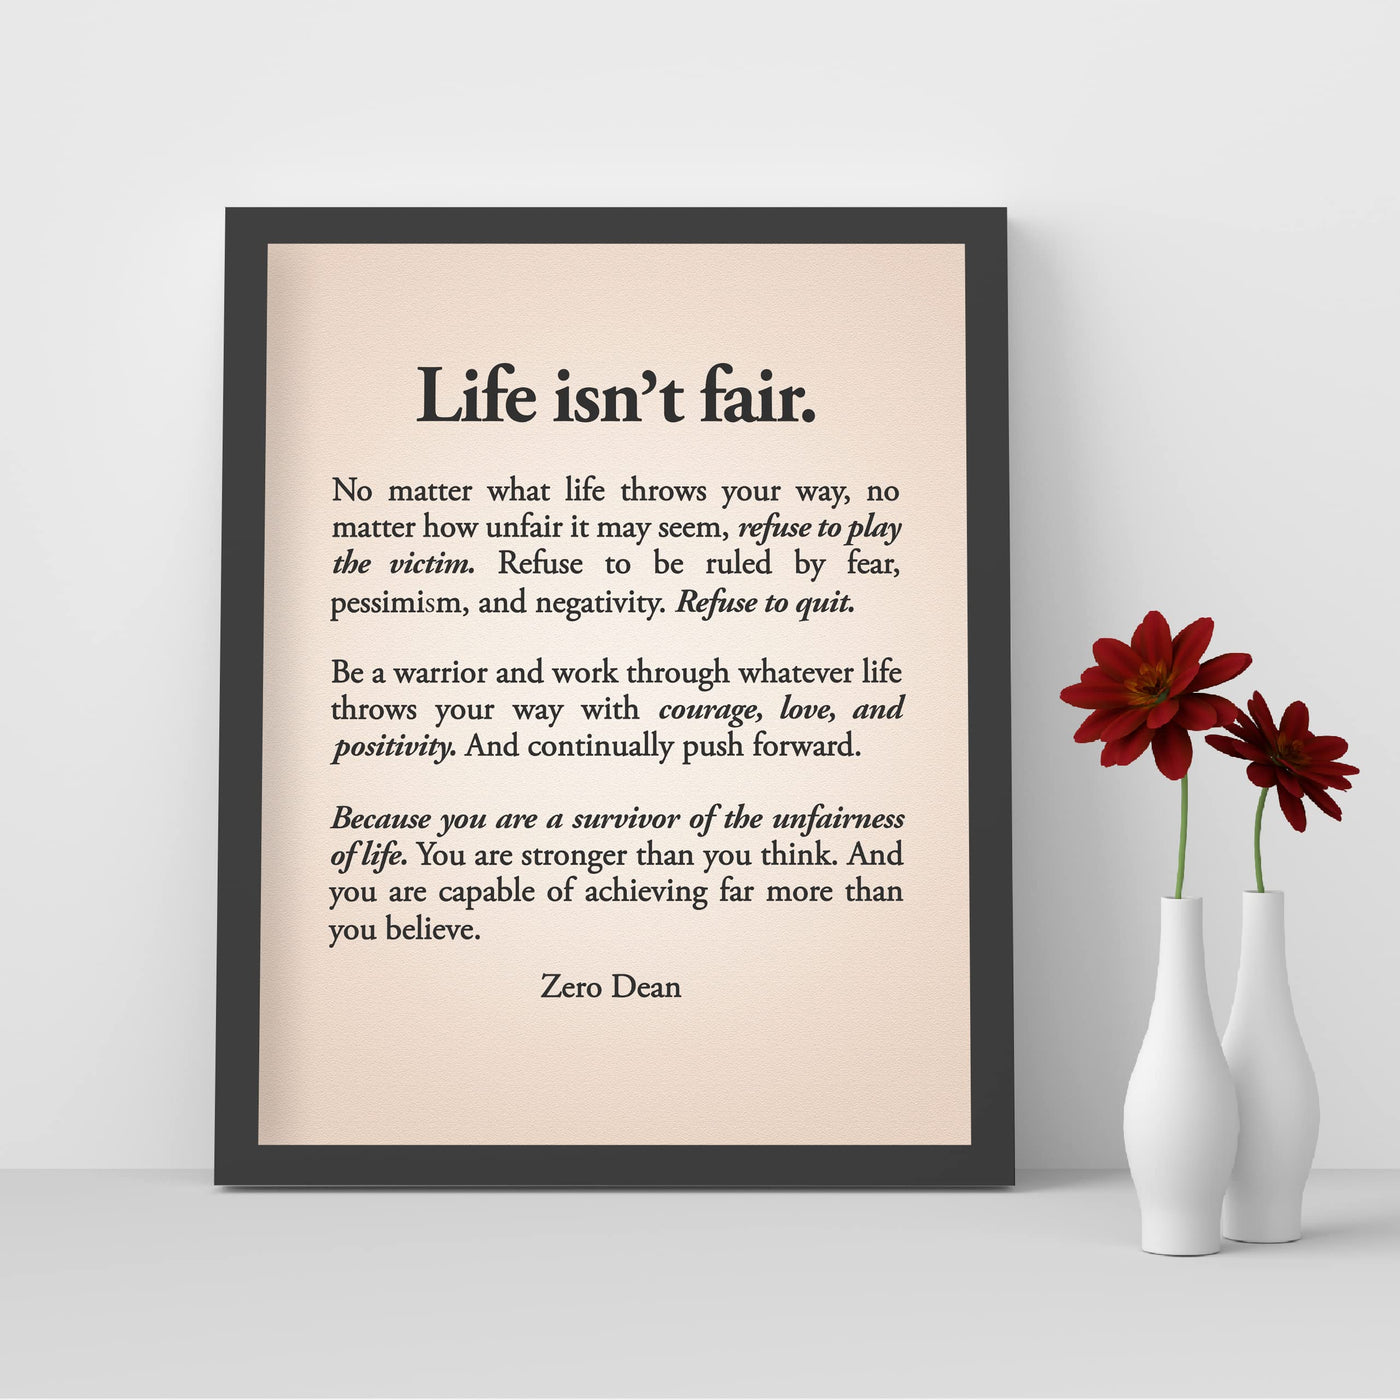 Life Isn't Fair Inspirational Quotes Wall Sign -8 x 10" Motivational Typography Art Print -Ready to Frame. Positive Decoration for Home-Office-Classroom Decor. Gift for Inspiration & Graduates!